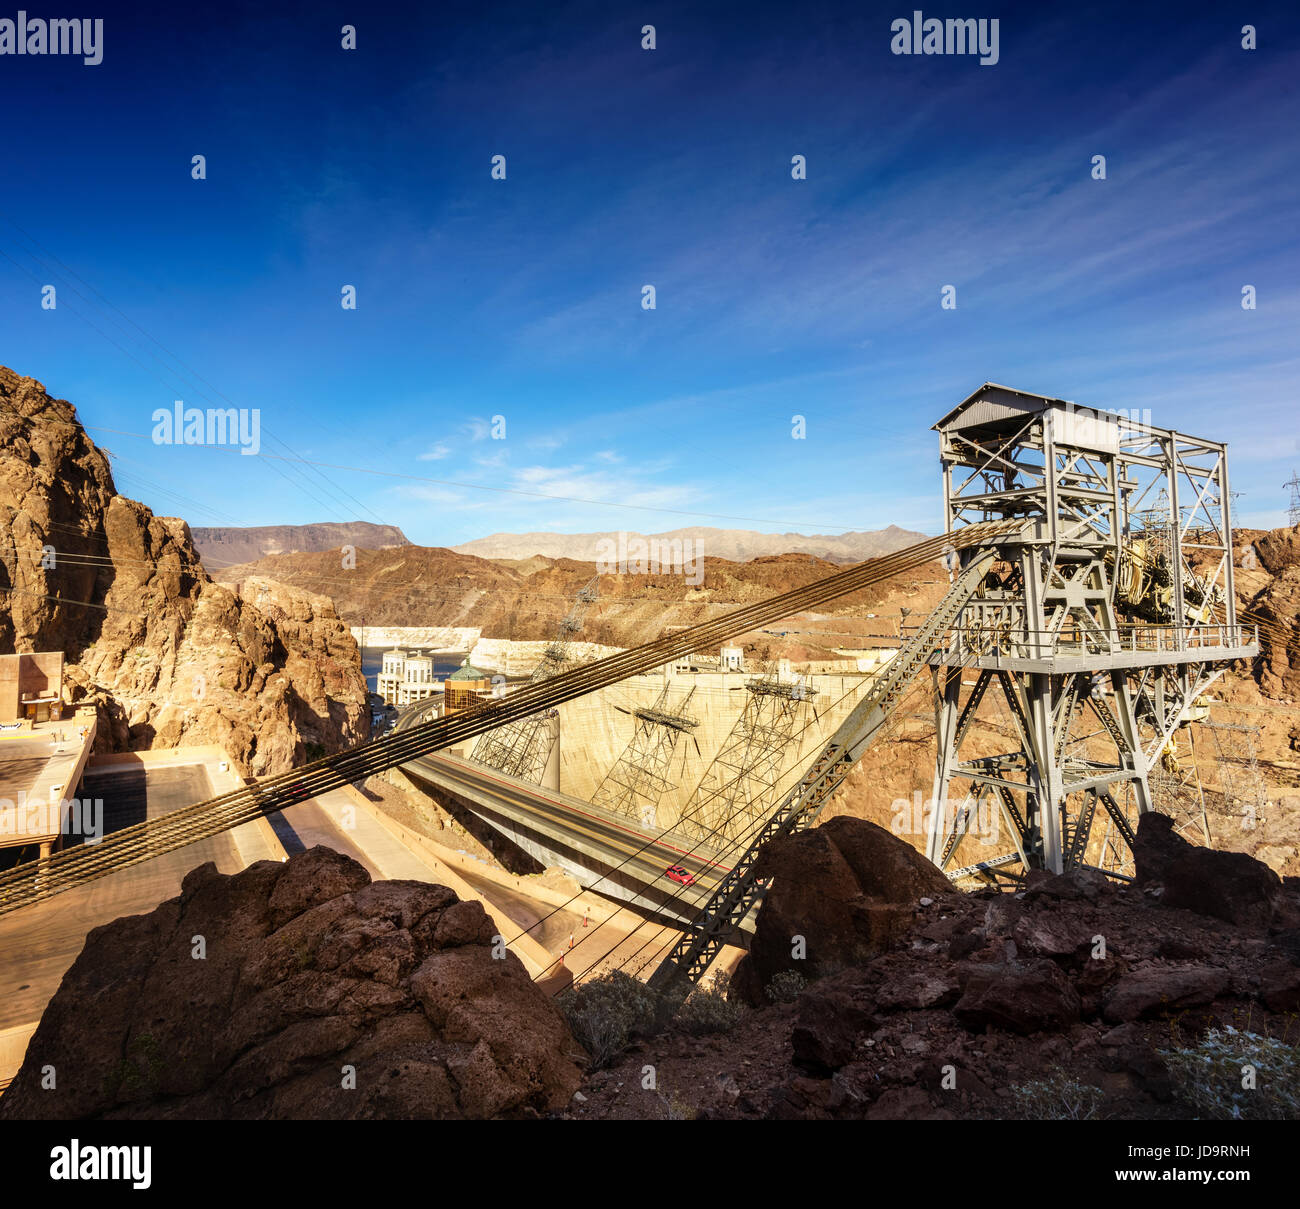 Metal structure in the Hoover dam canyon, Colorado river, USA. Stock Photo